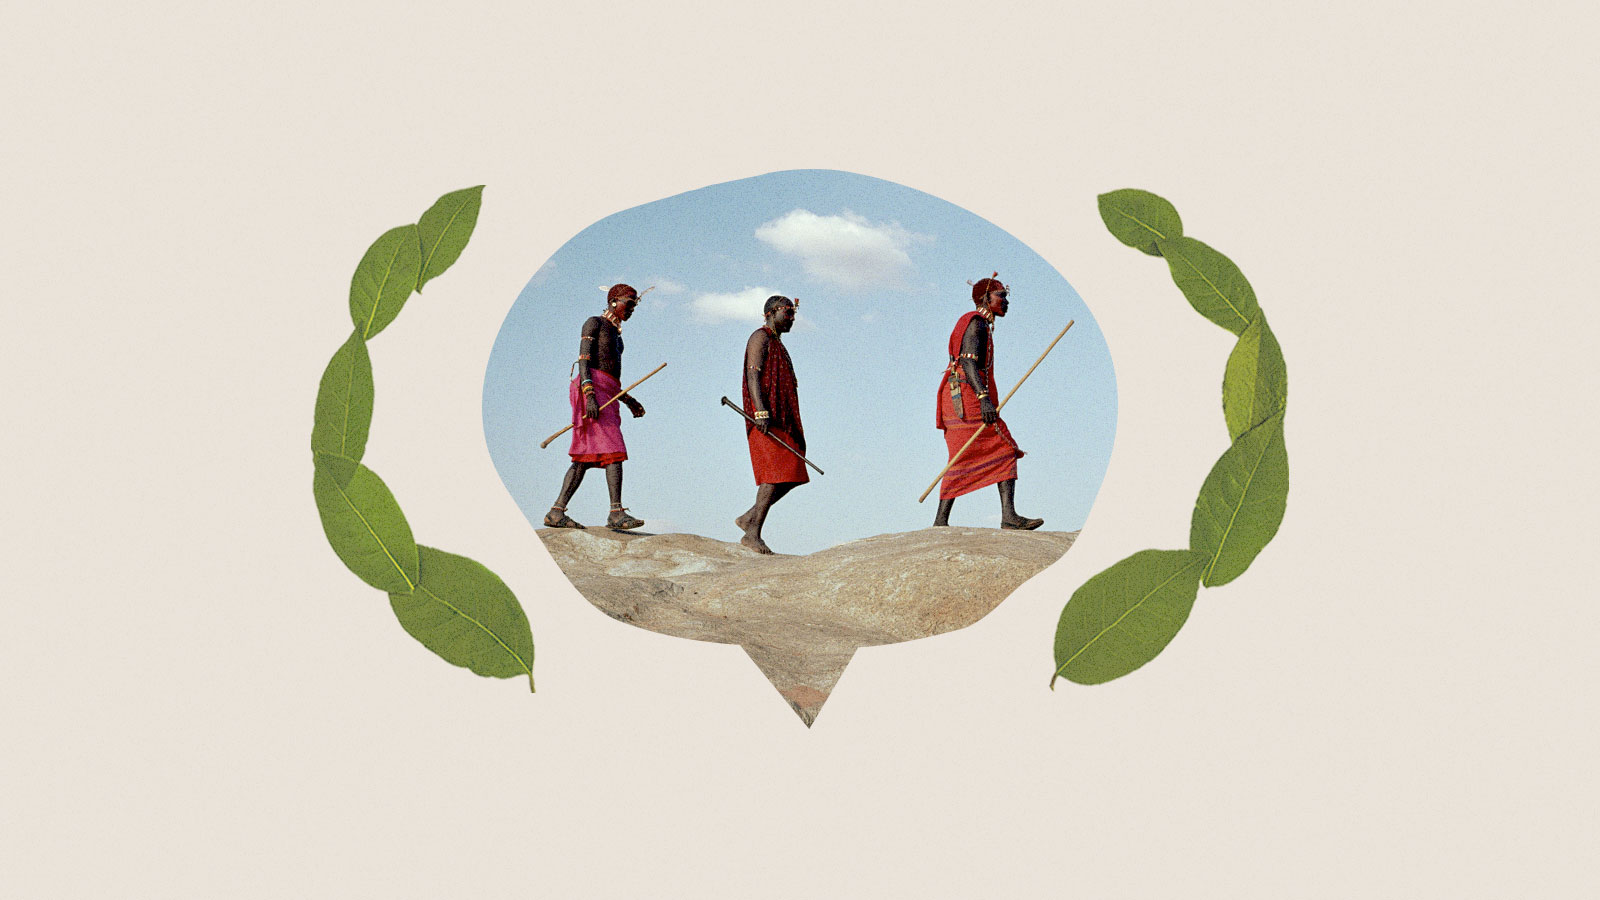 Collage of a photo of Maasai men cut into a speech bubble and framed by a laurel wreath